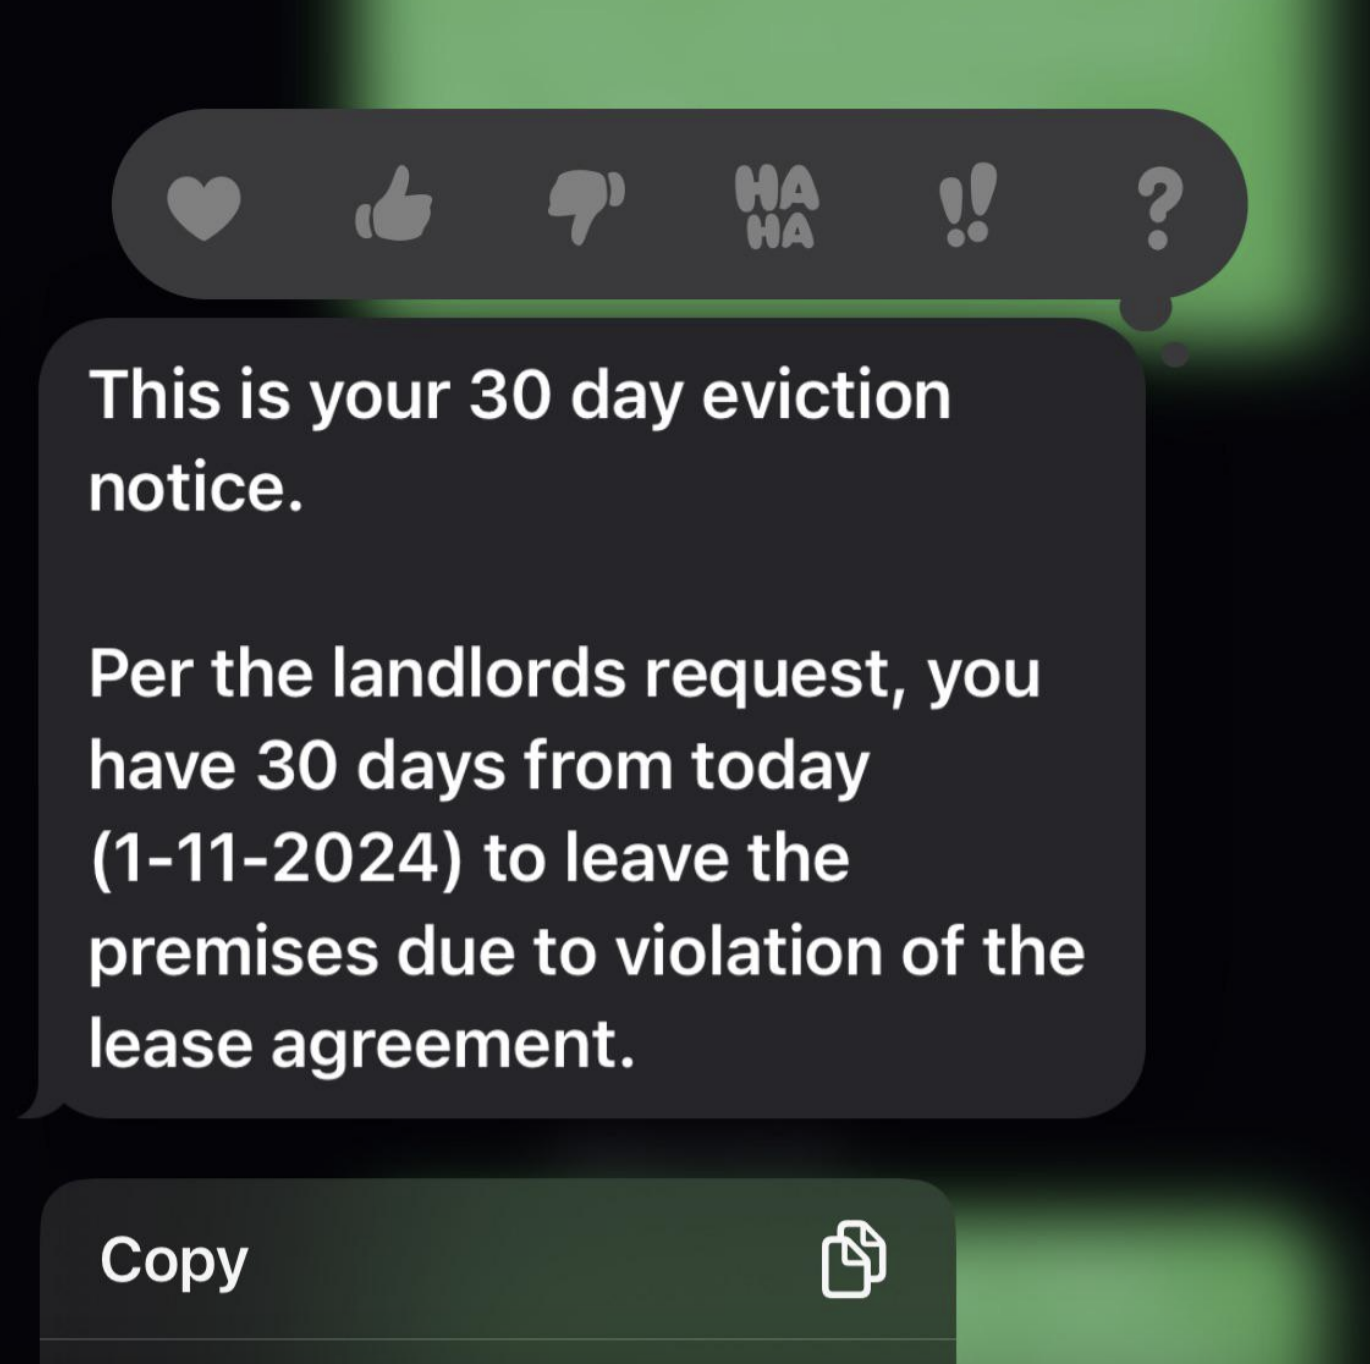 Eviction notice text message with a deadline of January 30, 2024, for leaving premises due to lease agreement violation